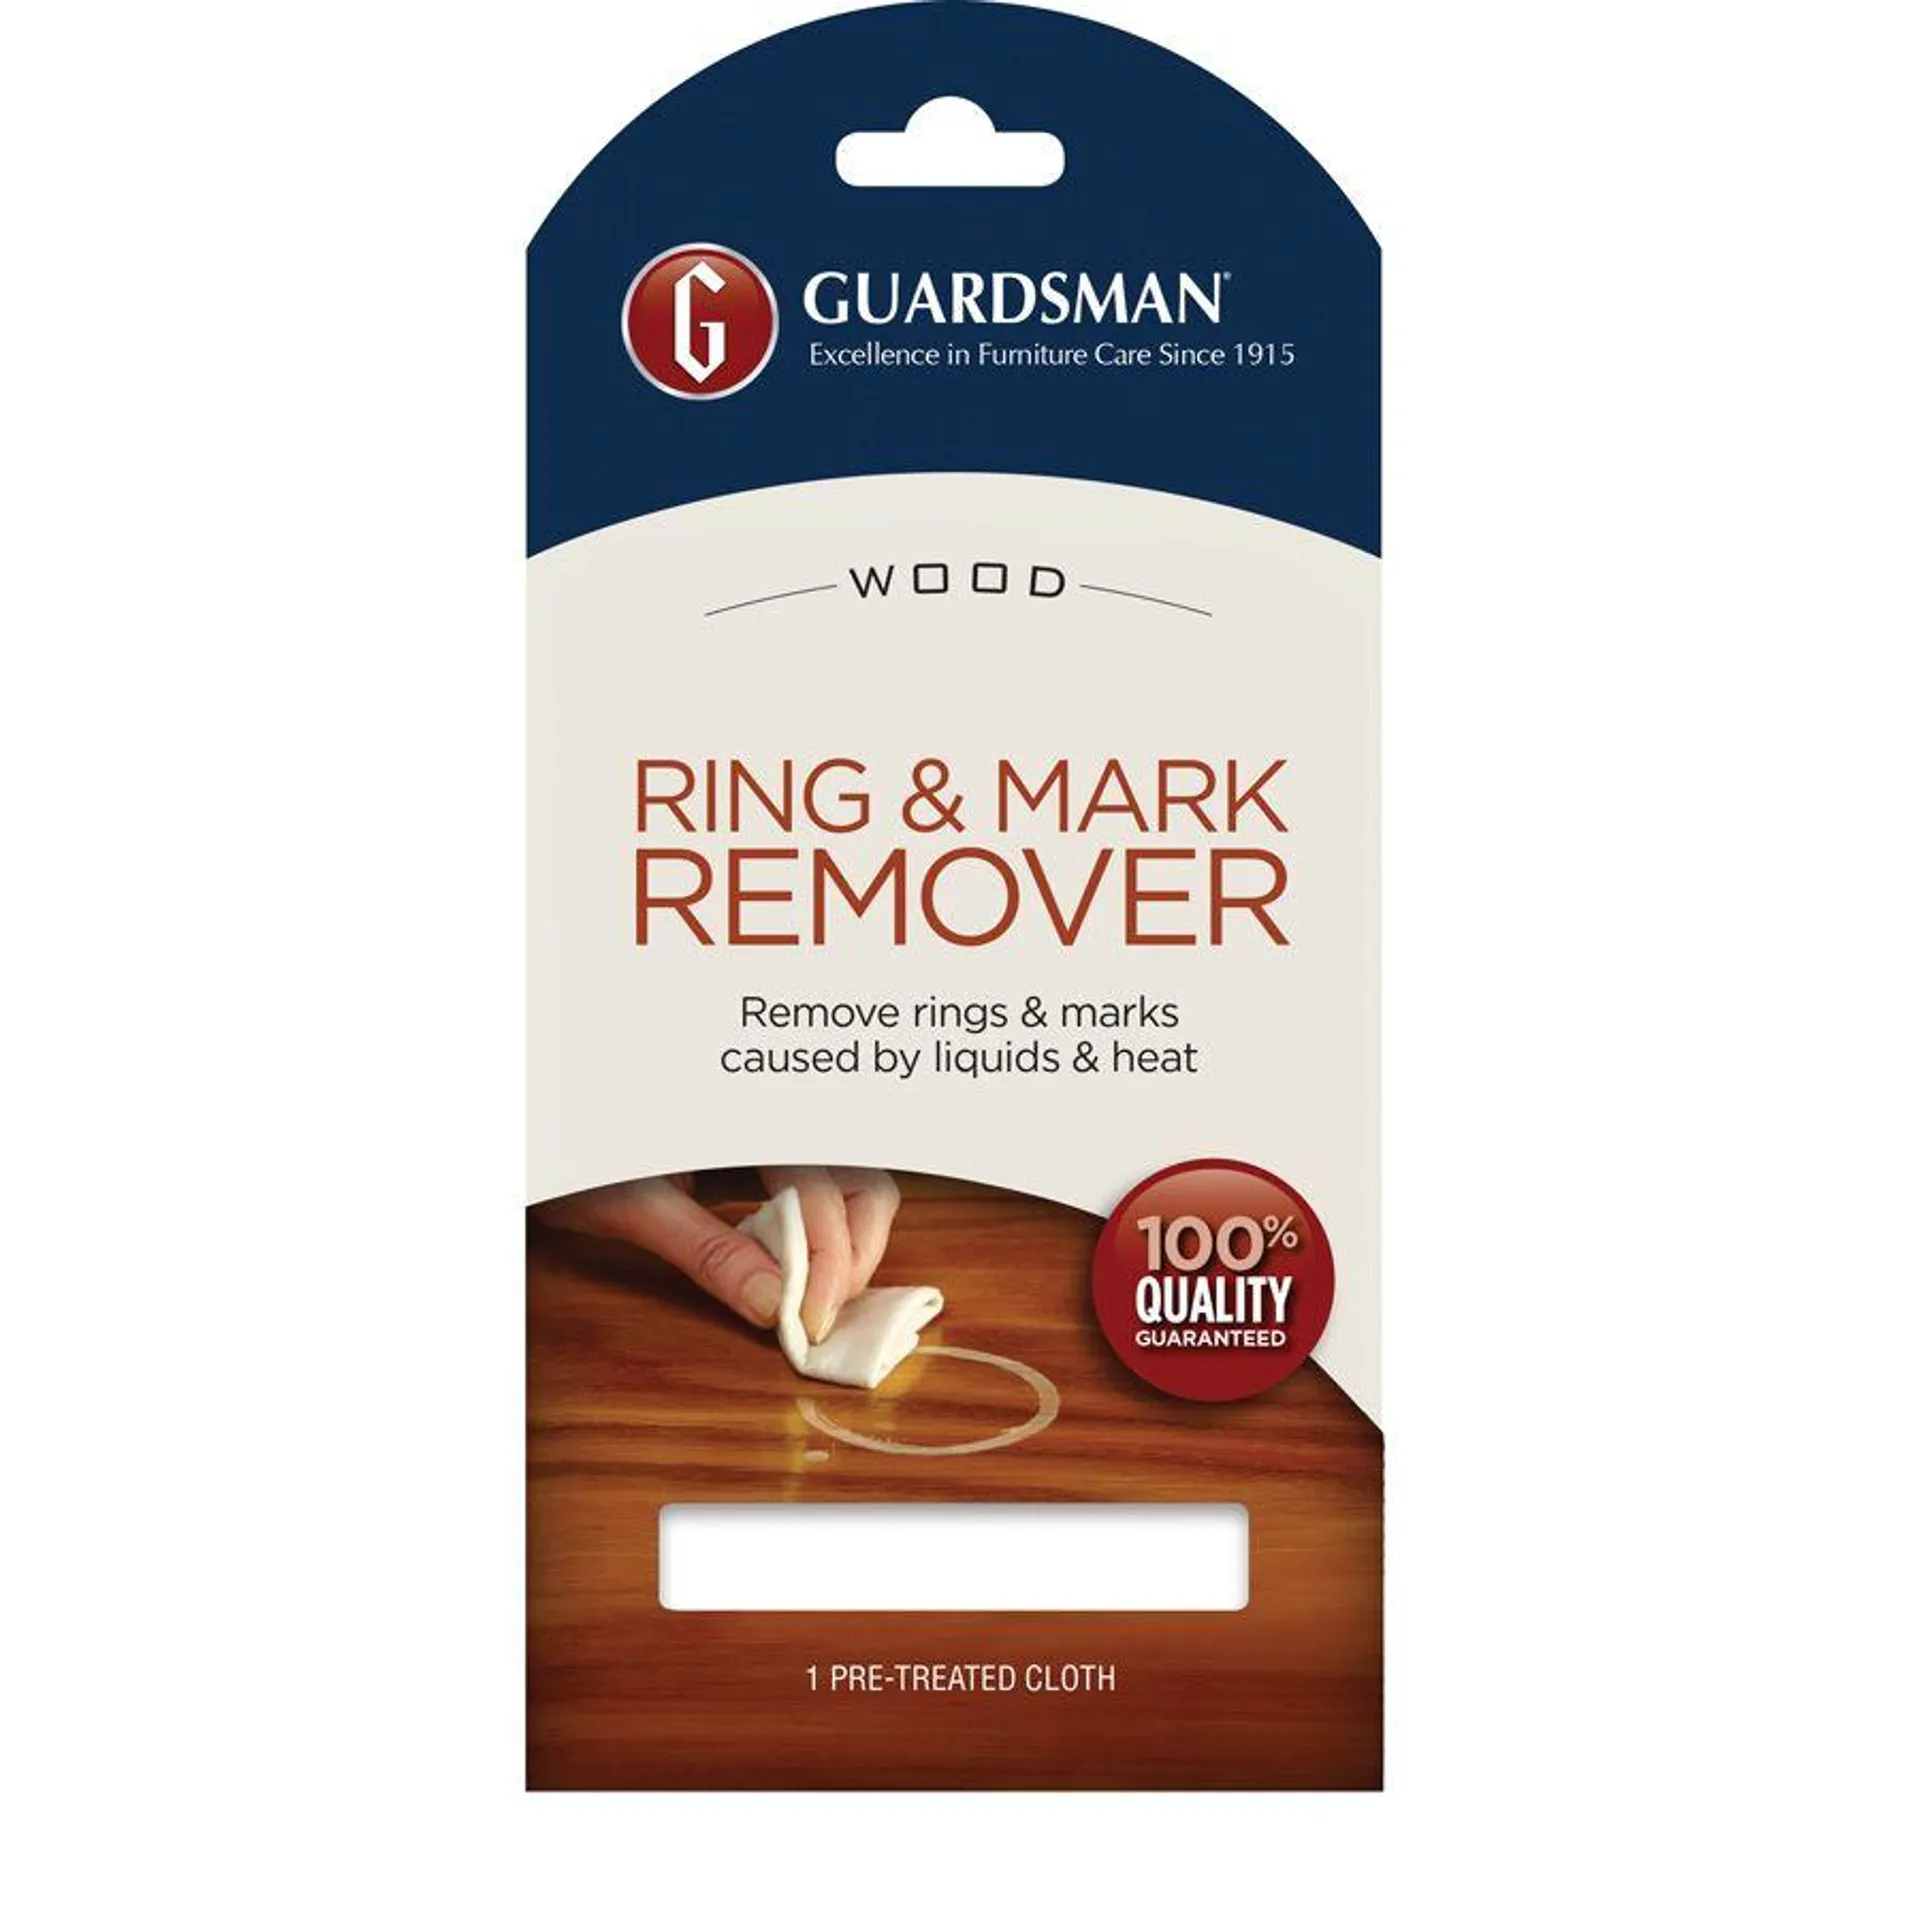 Guardsman Water Ring and Mark Remover